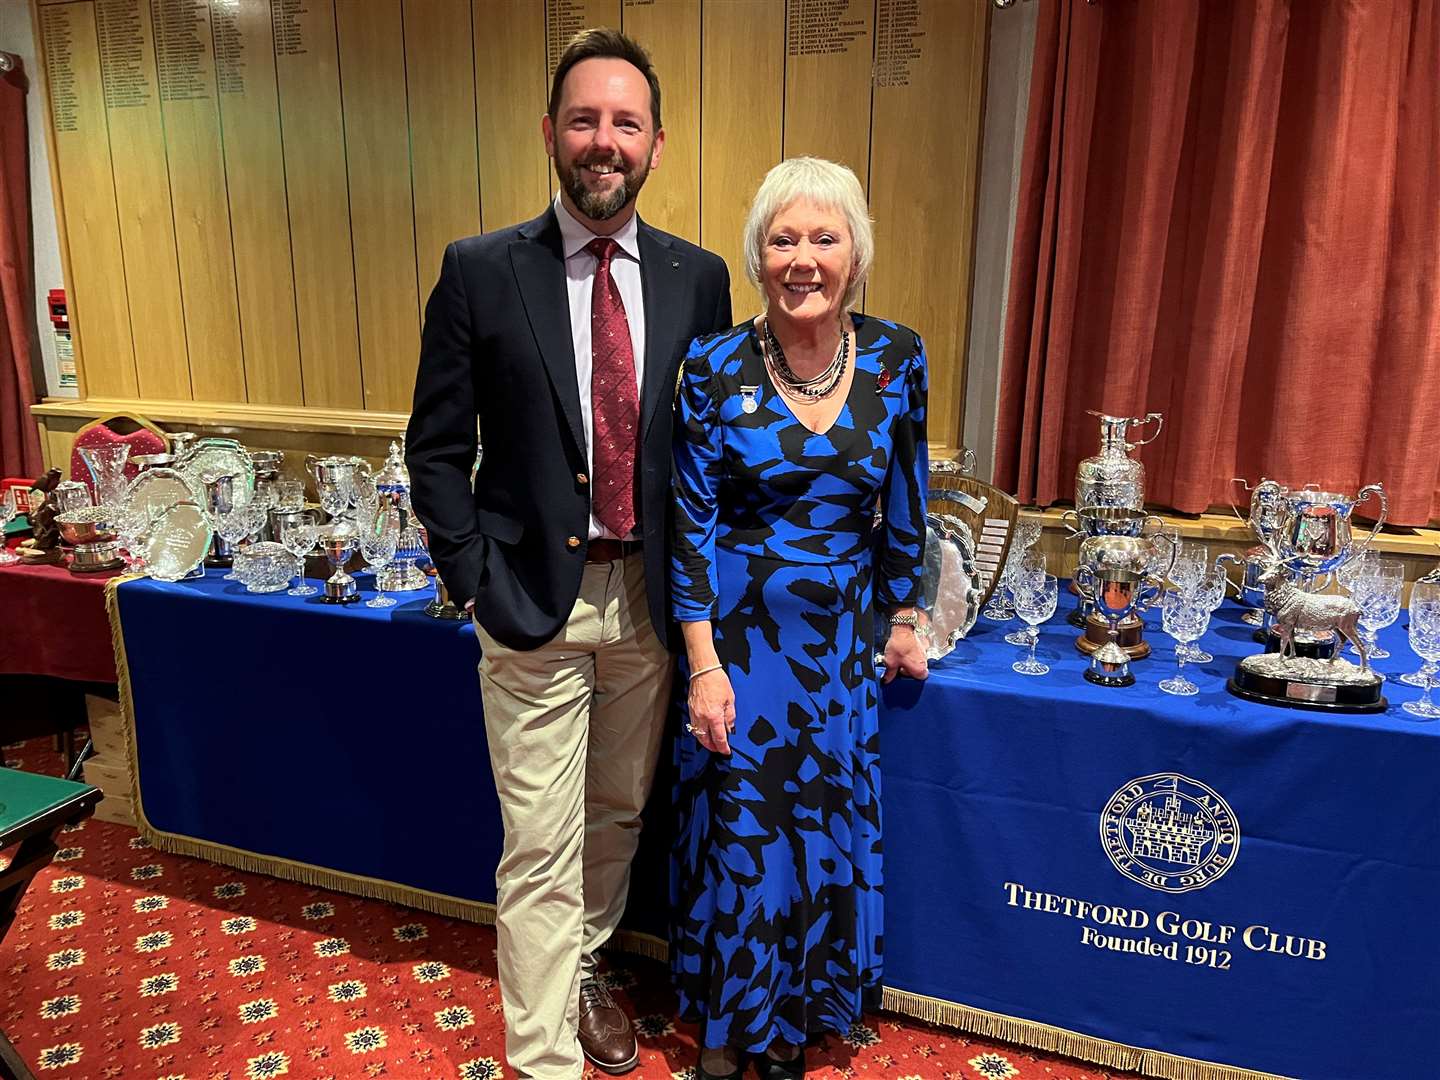 Thetford club captain Jason Huggins and Ladies’ captain Vicki Smith at the club's Annual Prize Giving Picture: Ellie Walton